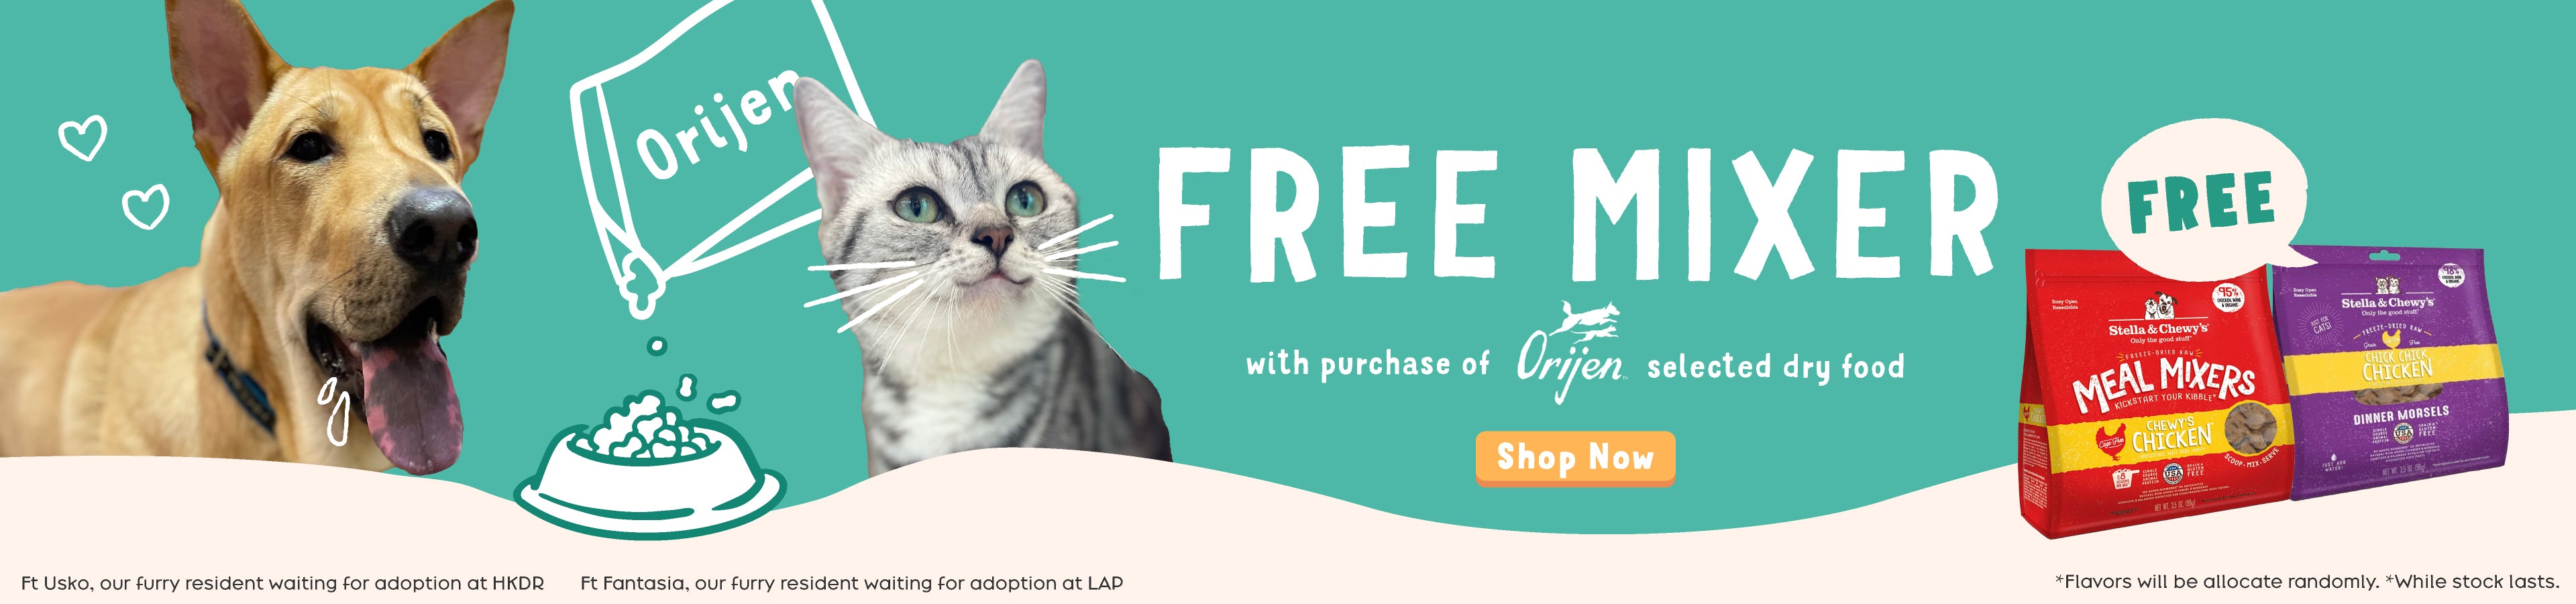 free mixer with purchase of orijen selected dry food